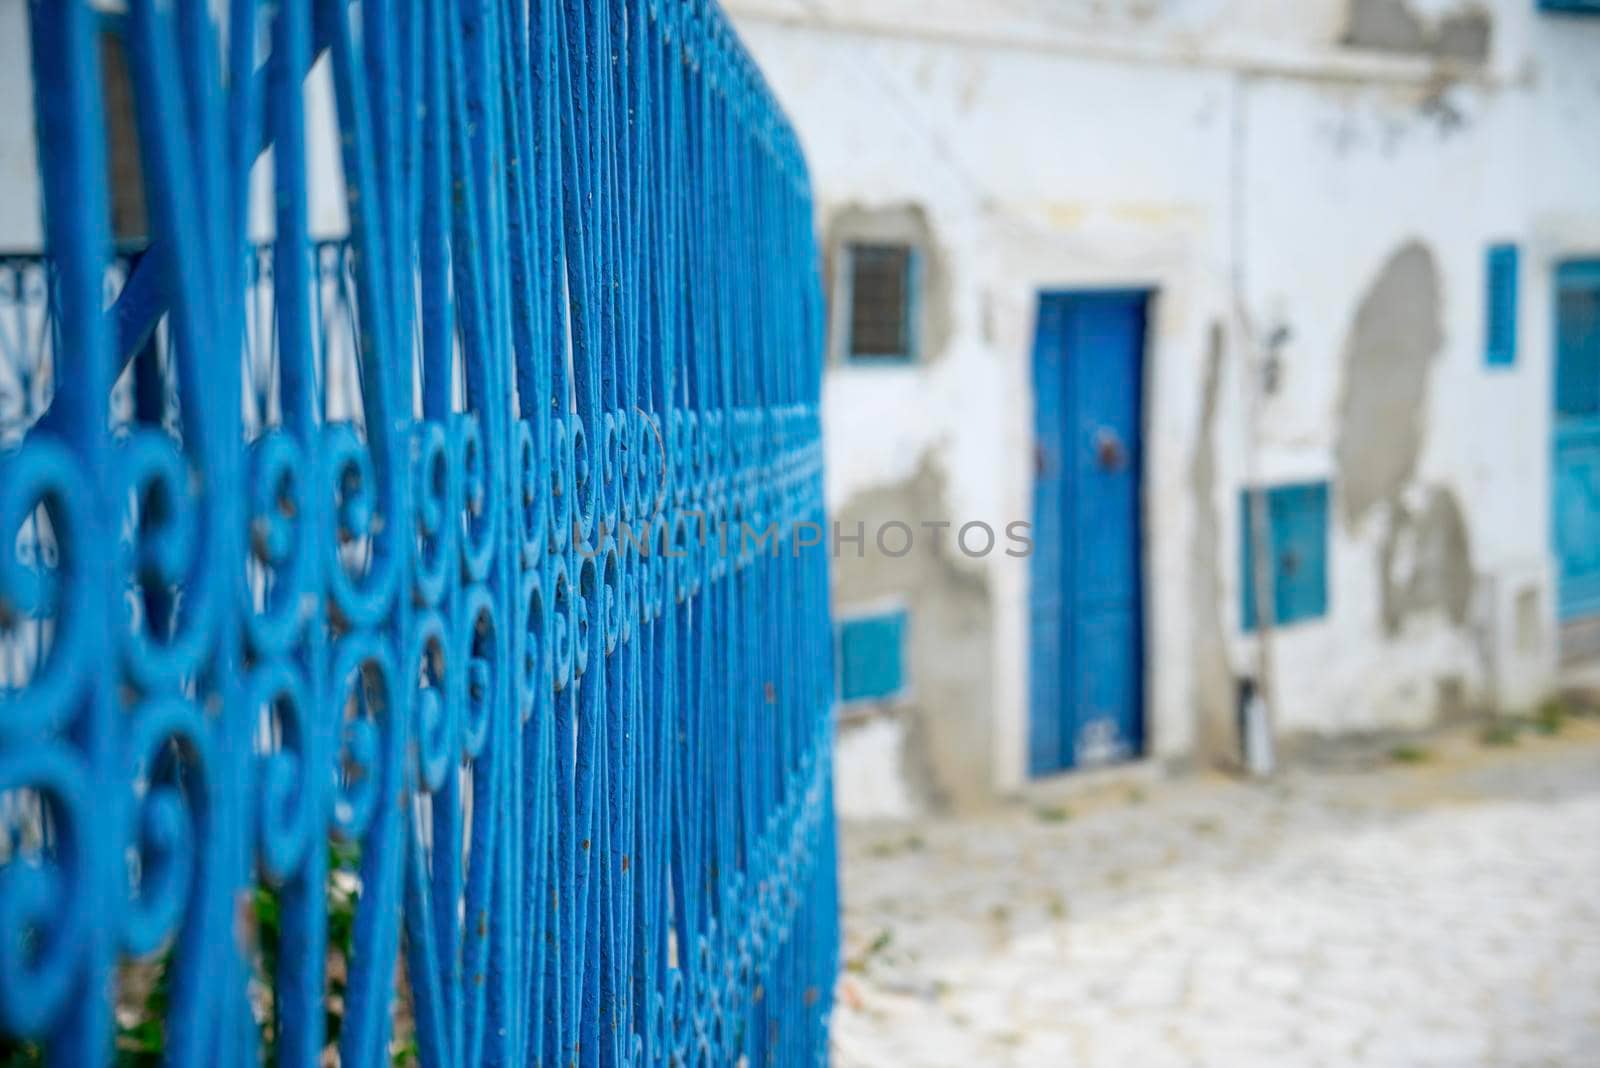 Aged Blue doors and windows in Andalusian style from Sidi Bou Said by Arsgera